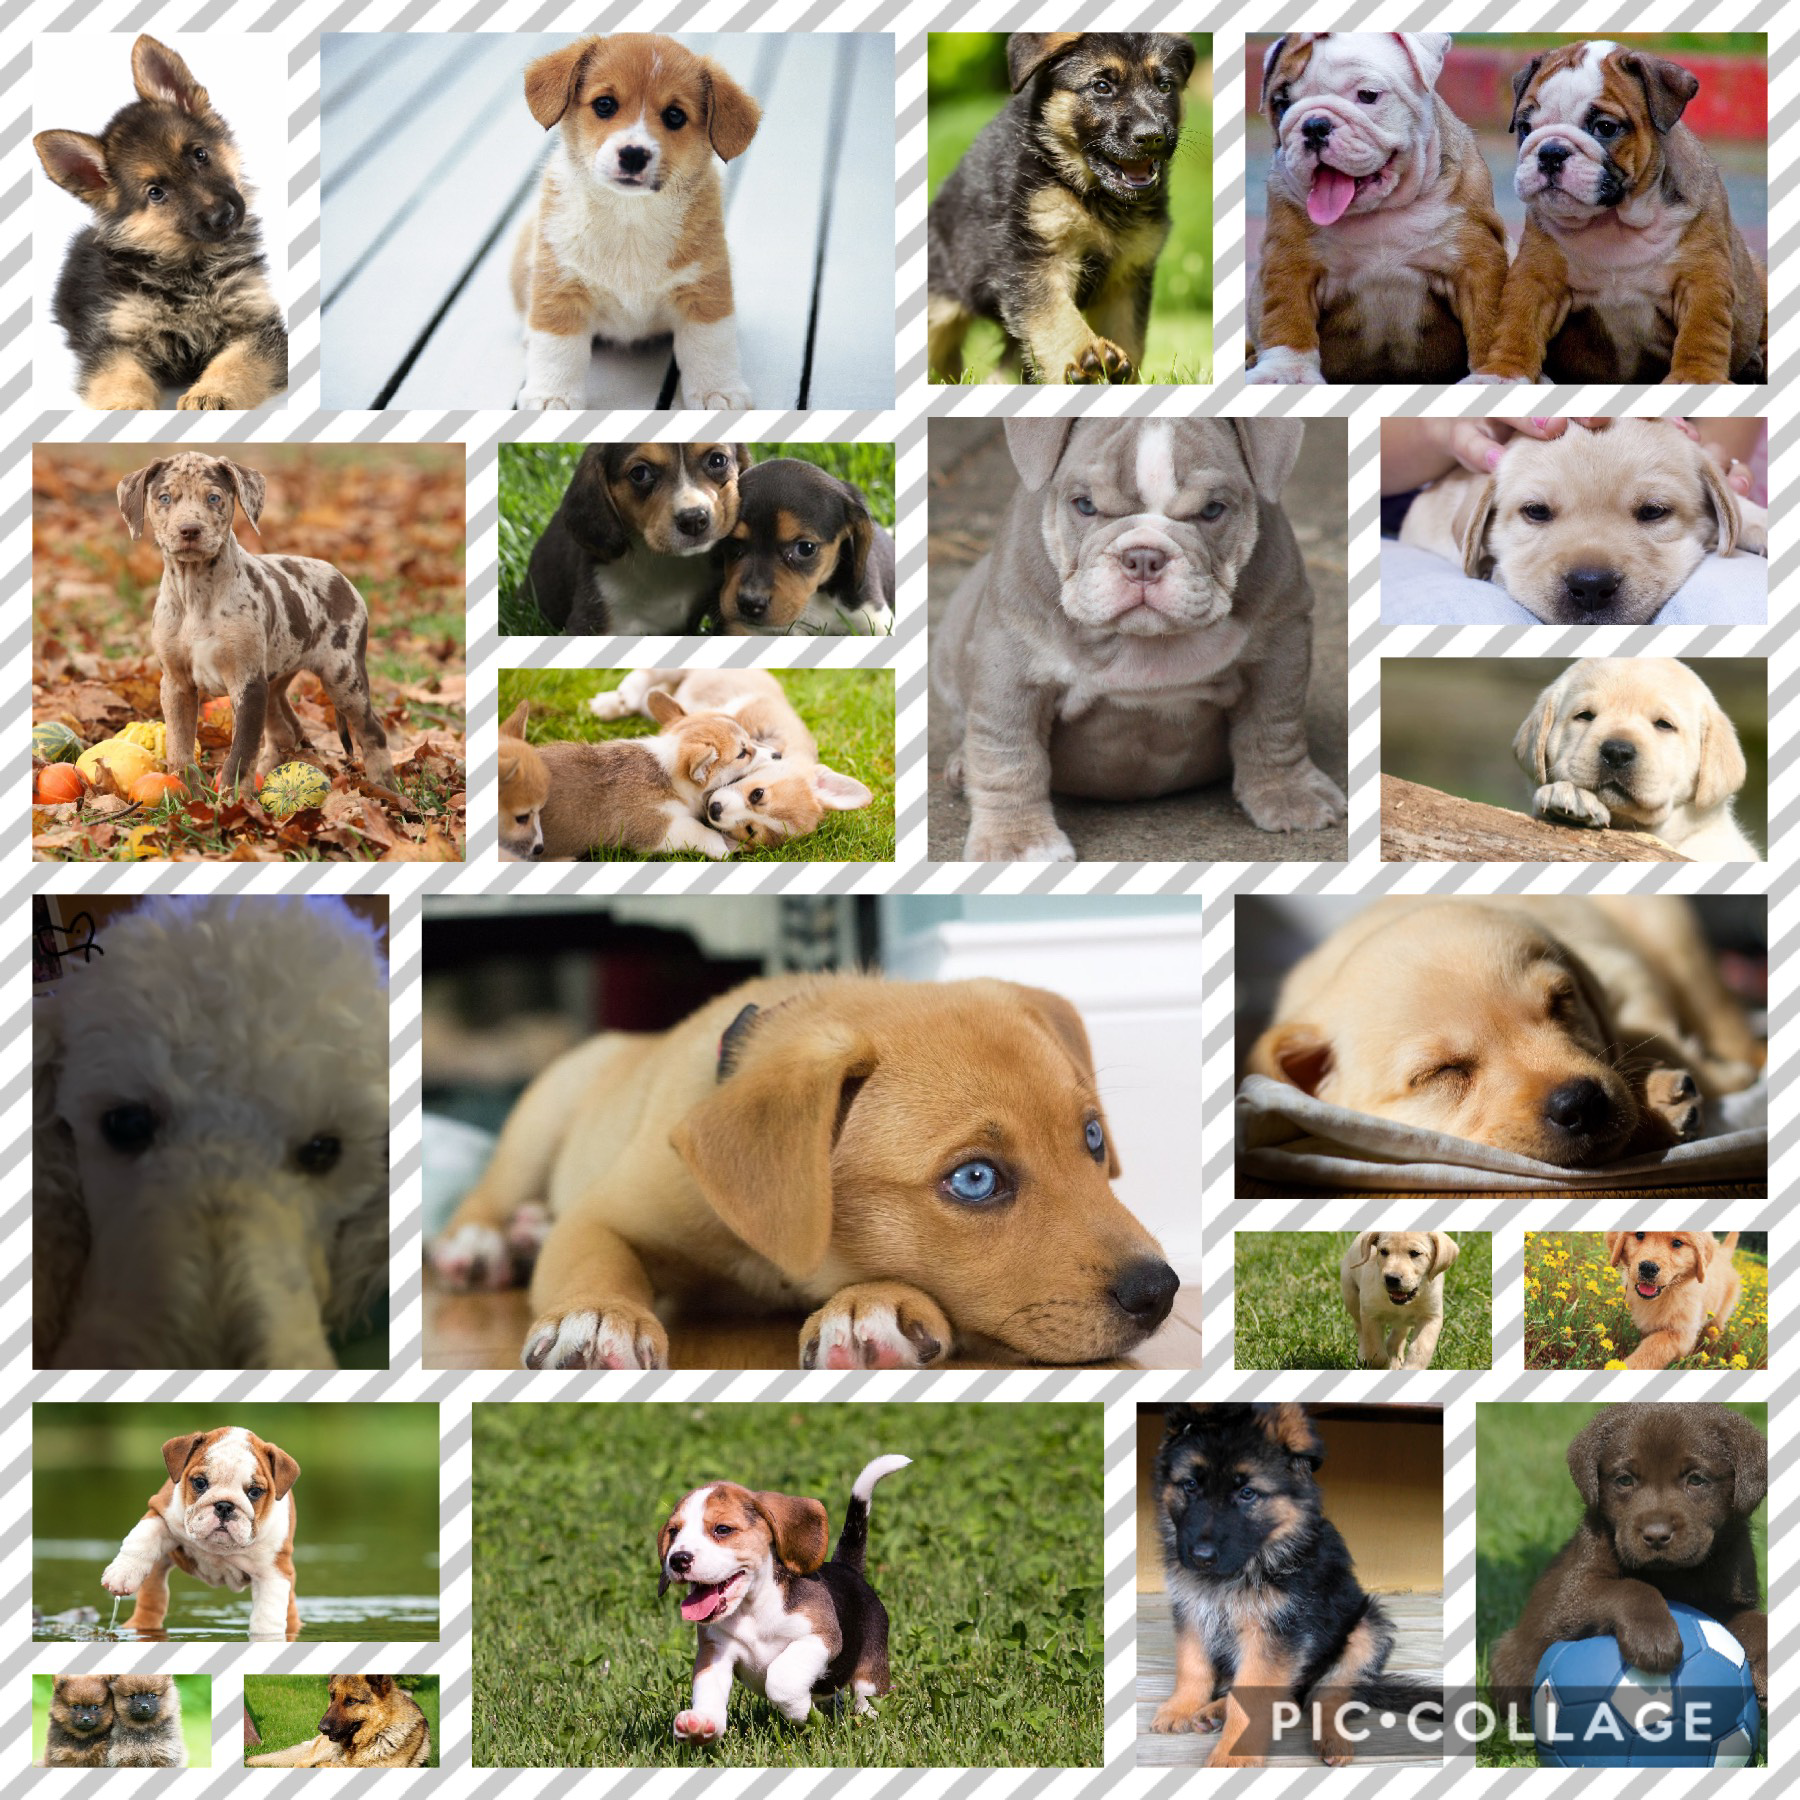 I love puppy’s!! If u can find the picture of the puppy with the heart by it I will like some of your pictures. (Probably about 5 or 8 of them.)